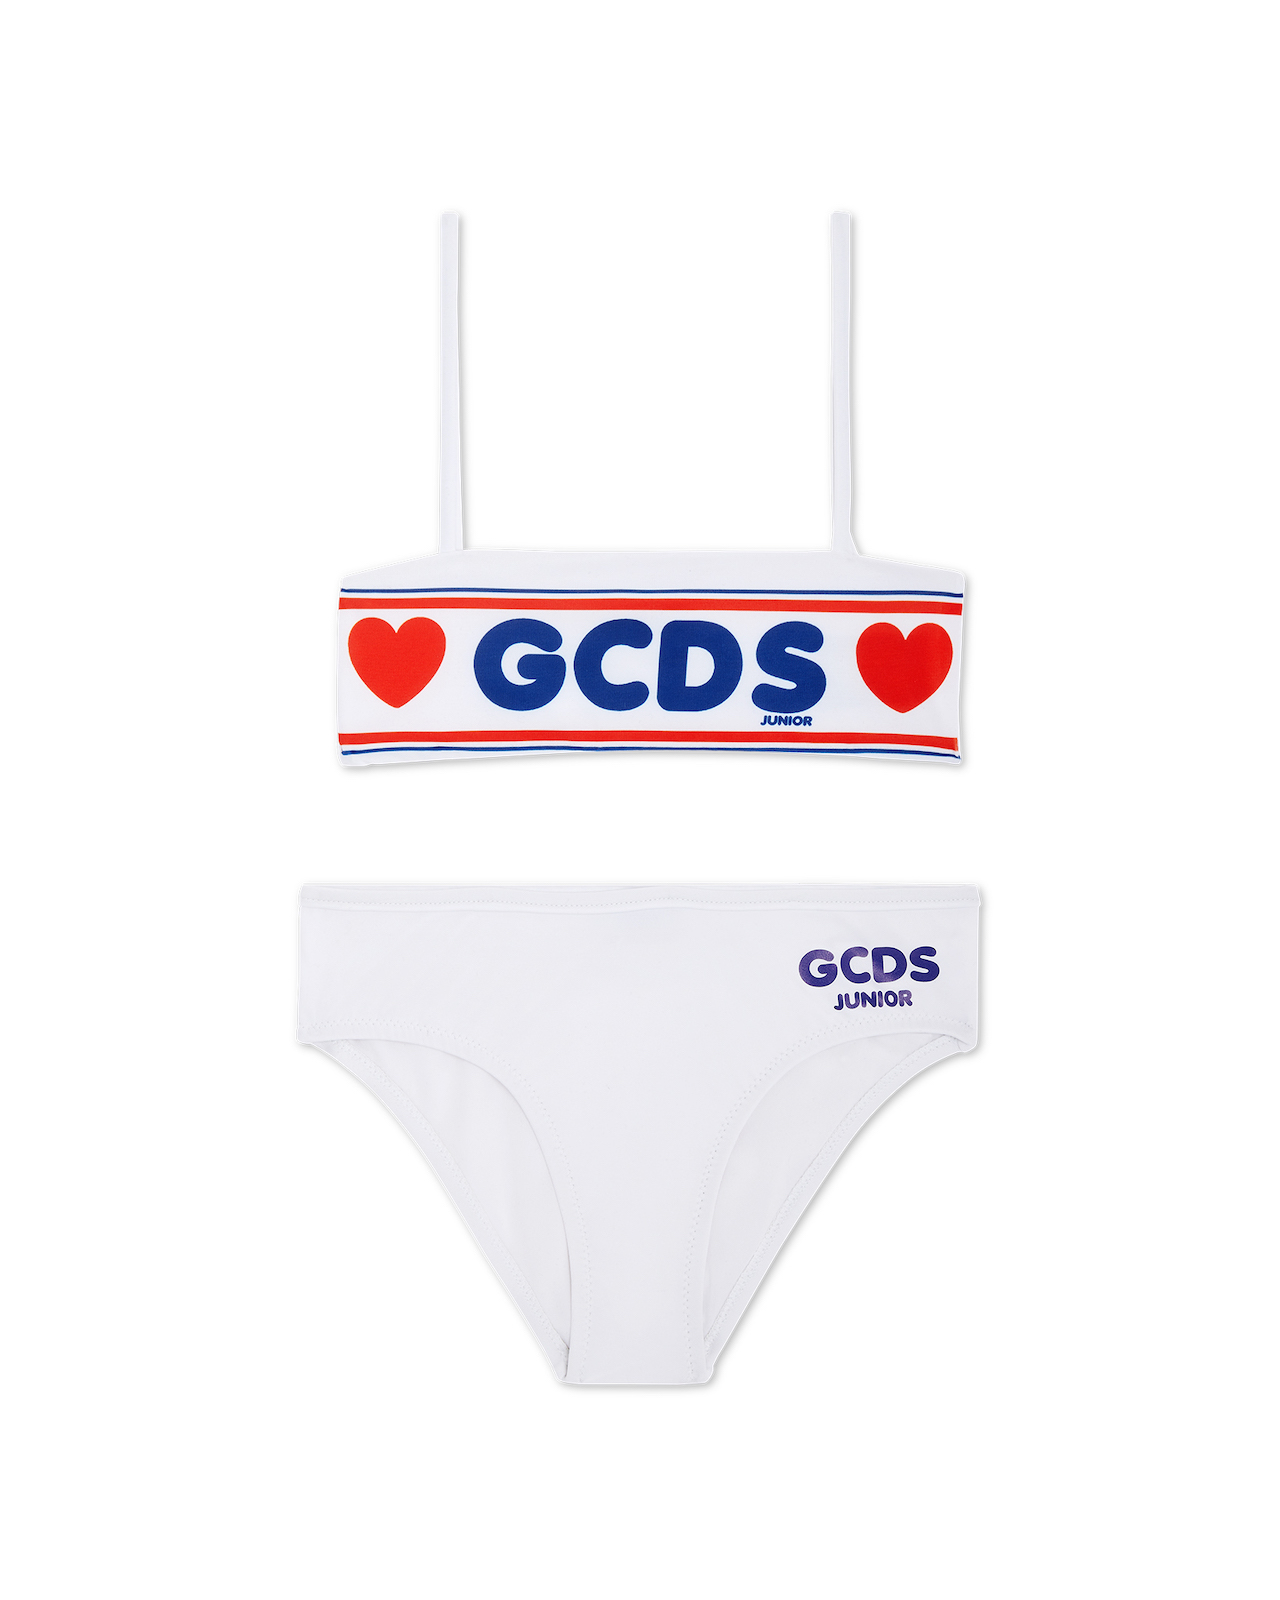  A swimsuit from the GCDS Junior SS 22 collection.